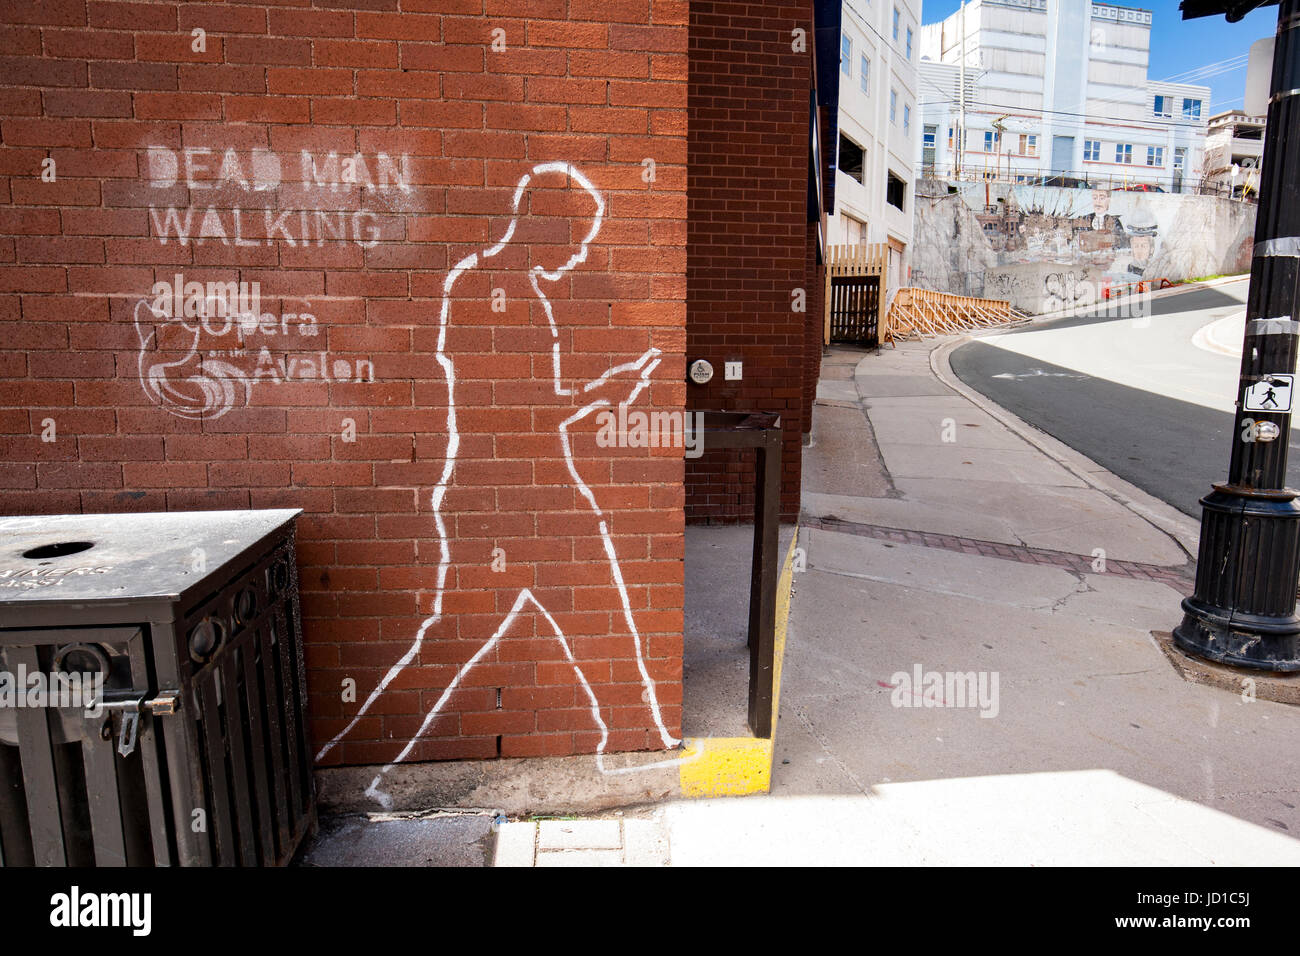 Dead Man Walking Chalk Outlines in Streets of St. John's, Newfoundland, Canada Stock Photo